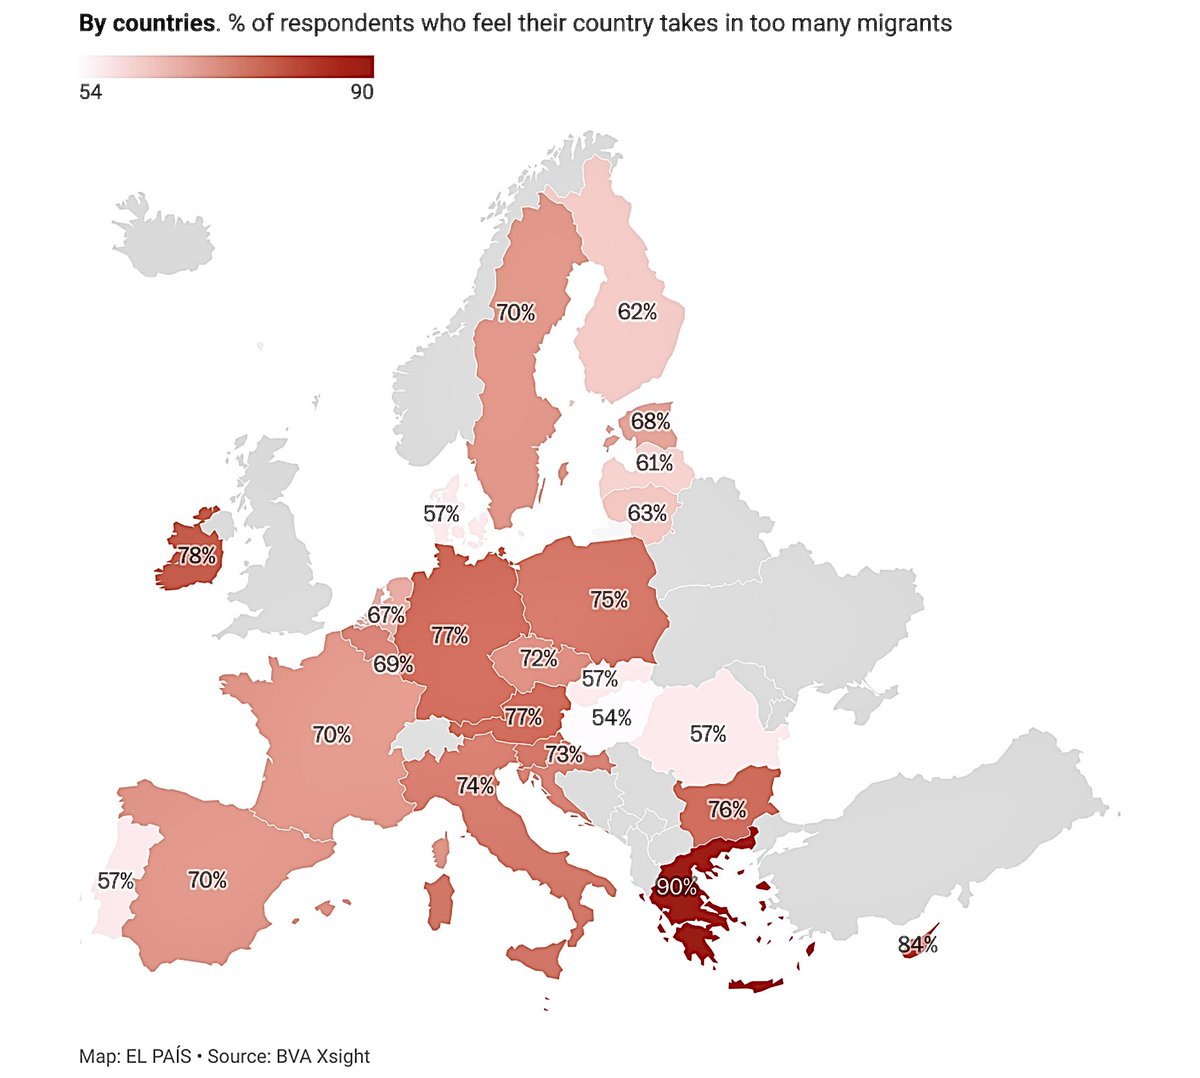 NEW SURVEY: 7 in 10 Europeans believe that their country is accepting too many migrants

Results broken down by country:

🇬🇷 Greece: 90% of citizens    
🇨🇾 Cyprus: 84% of citizens                      
🇮🇪 Ireland: 78% of citizens    
🇦🇹 Austria: 77% of citizens  
🇩🇪 Germany: 77%